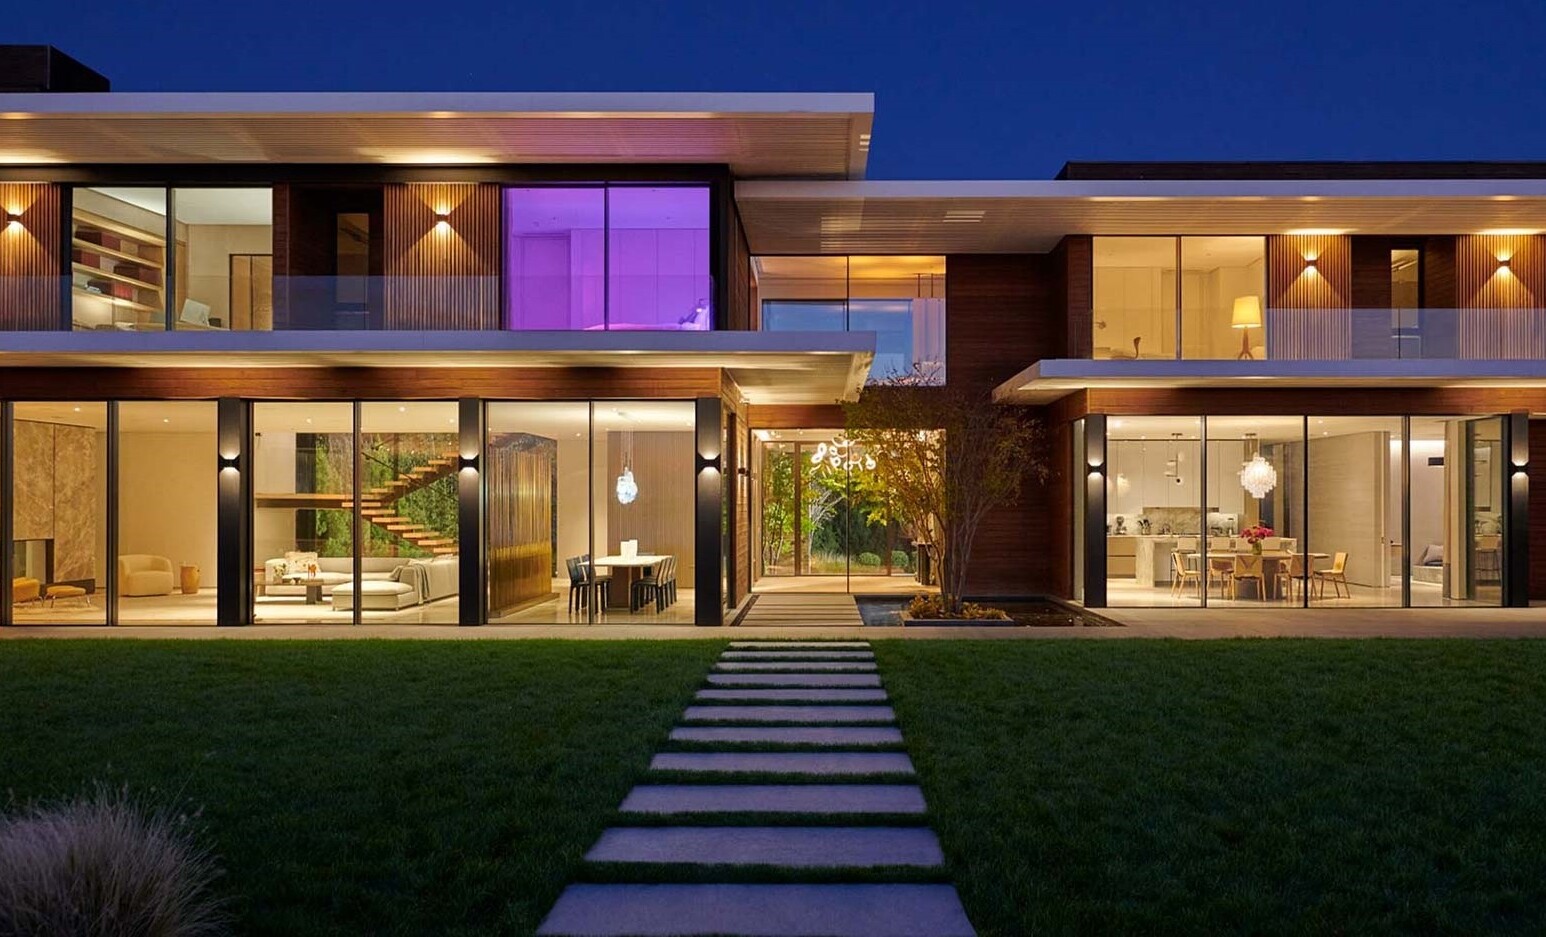 Exterior Evening View Minimalist Two-Story Home Floor With Interior Architectural Lighting